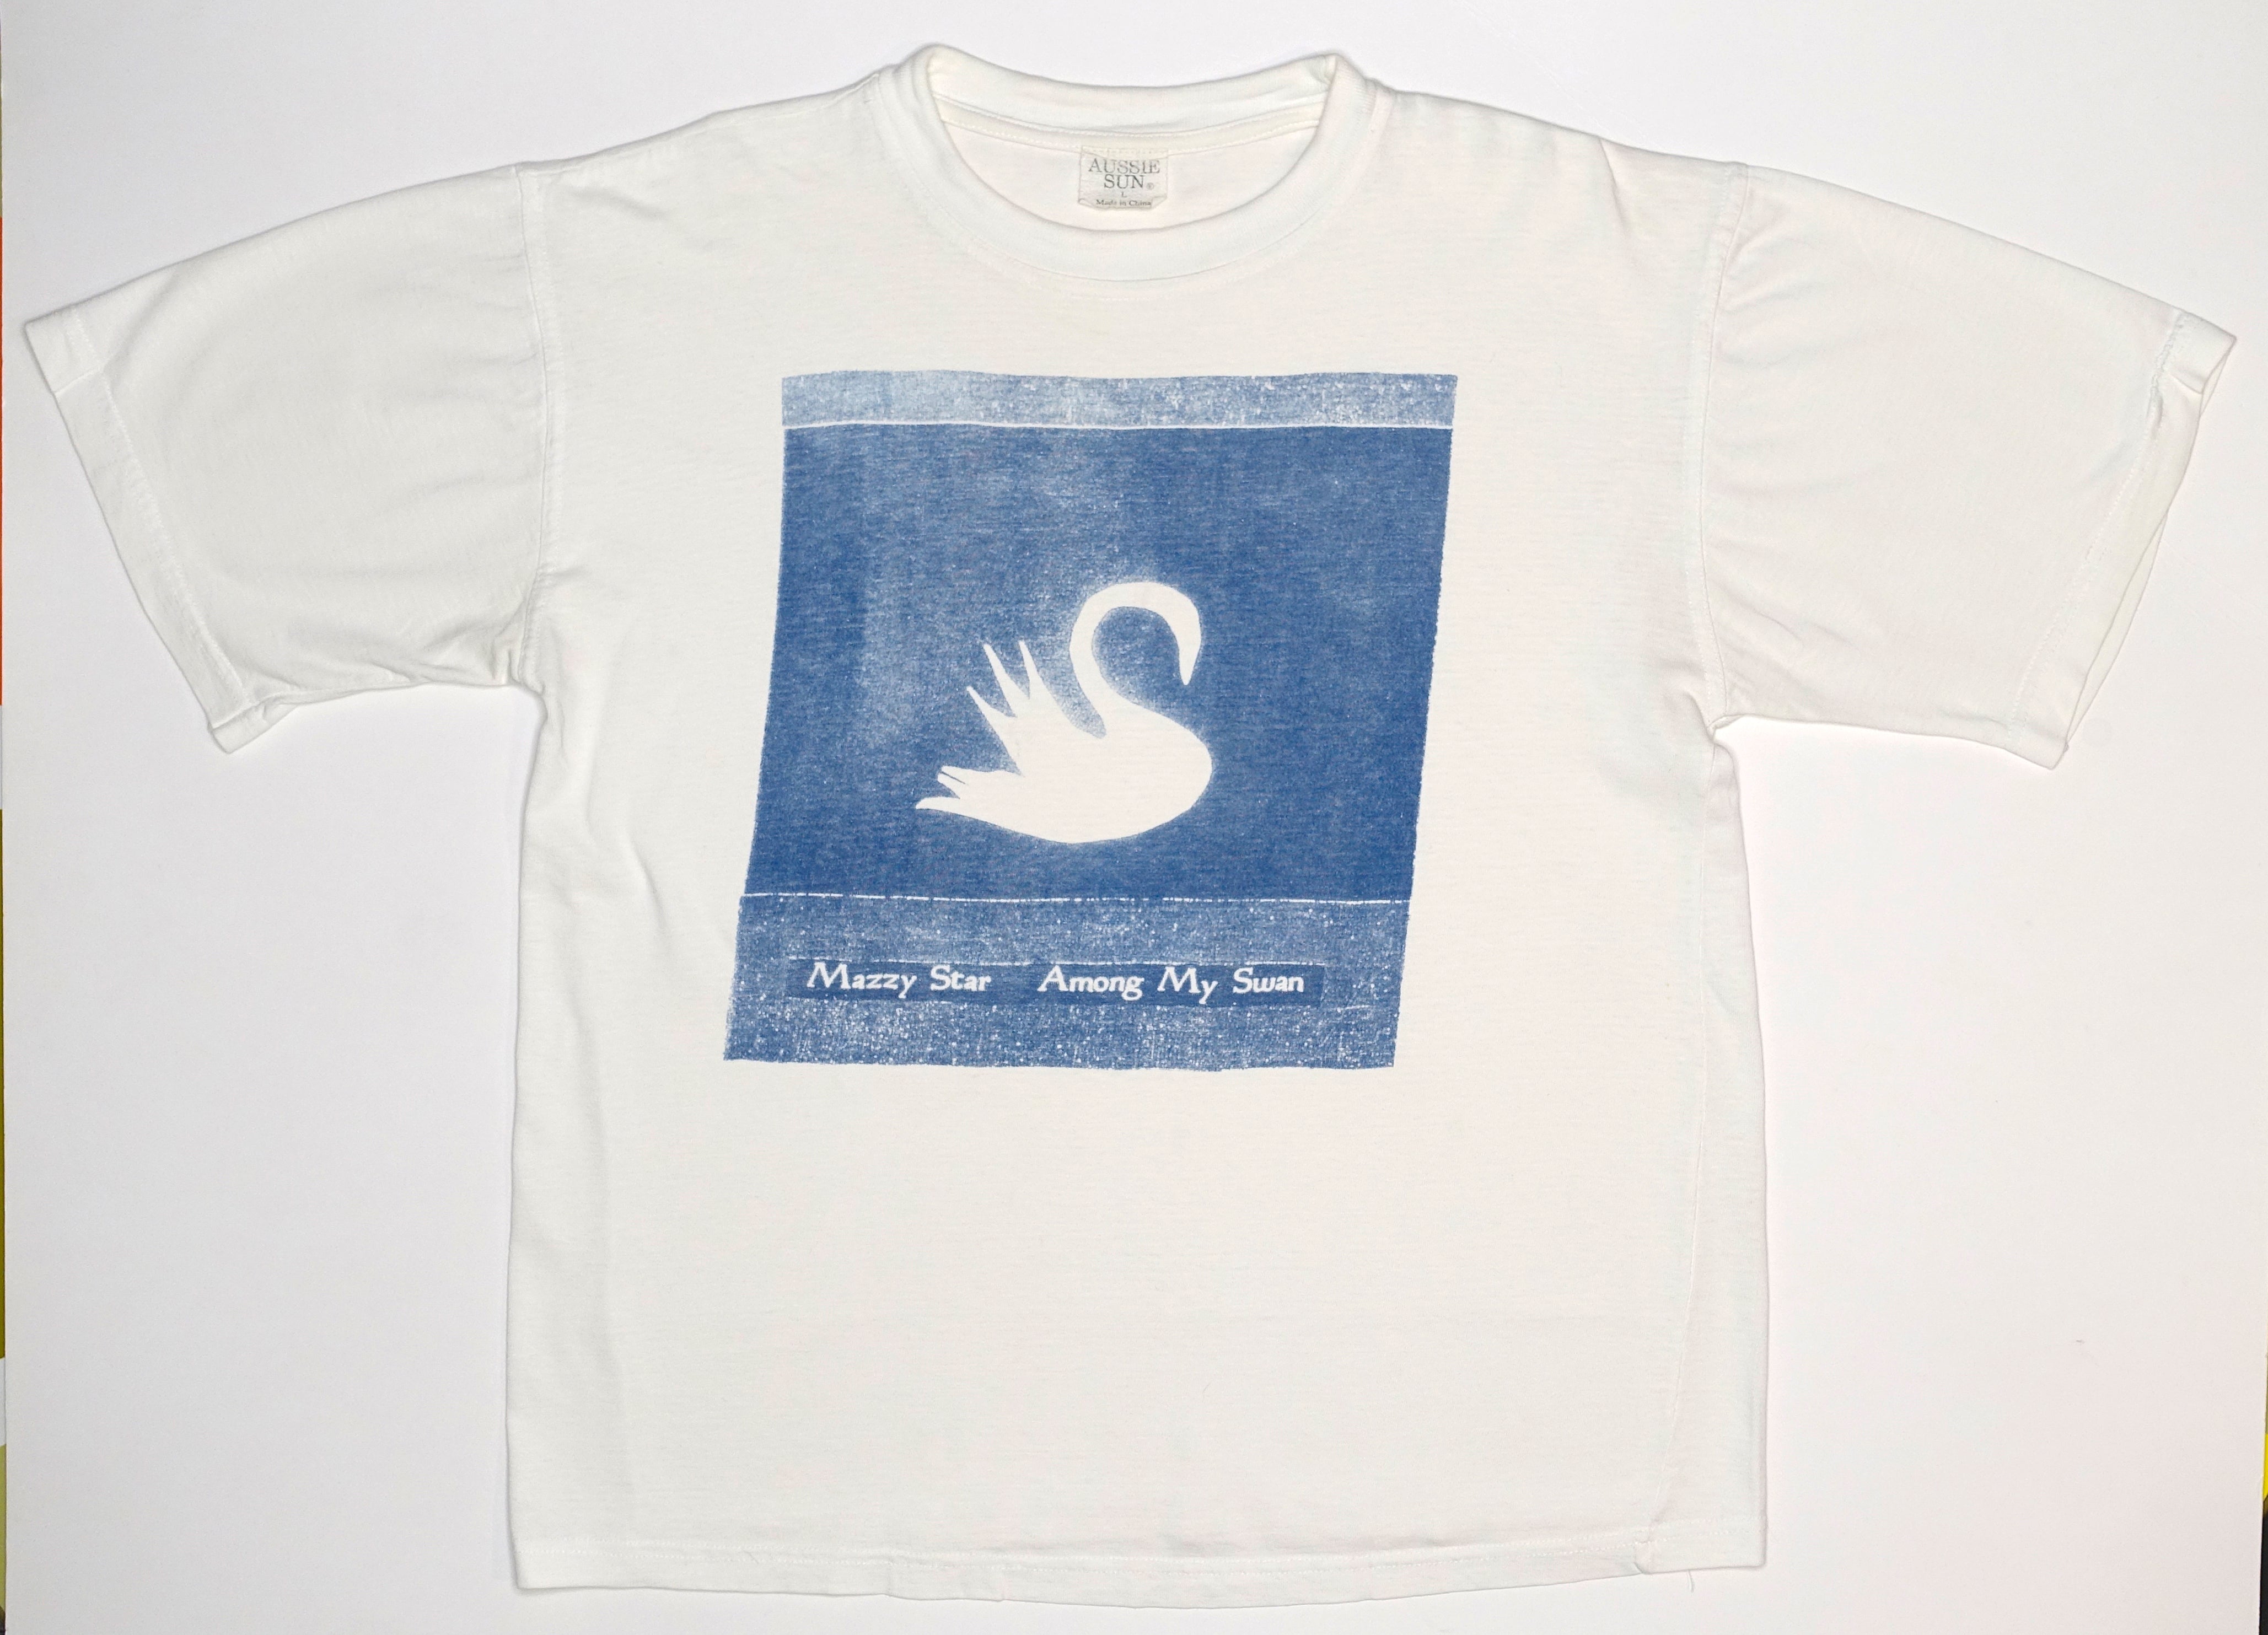 Mazzy Star ‎– Among My Swan 1996 Shirt Size Large